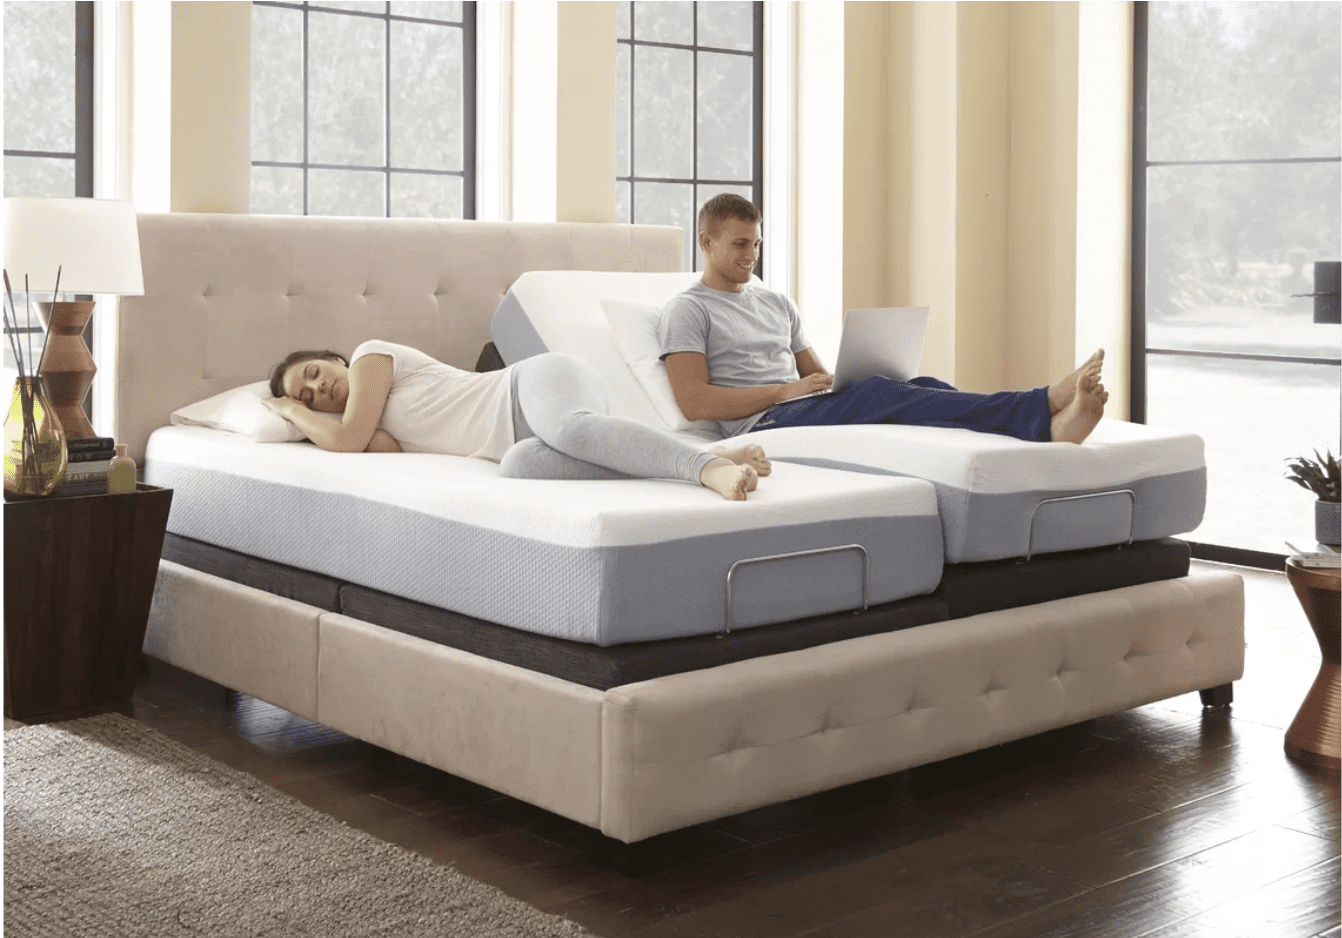 How to Find the Best Adjustable Mattress Bases